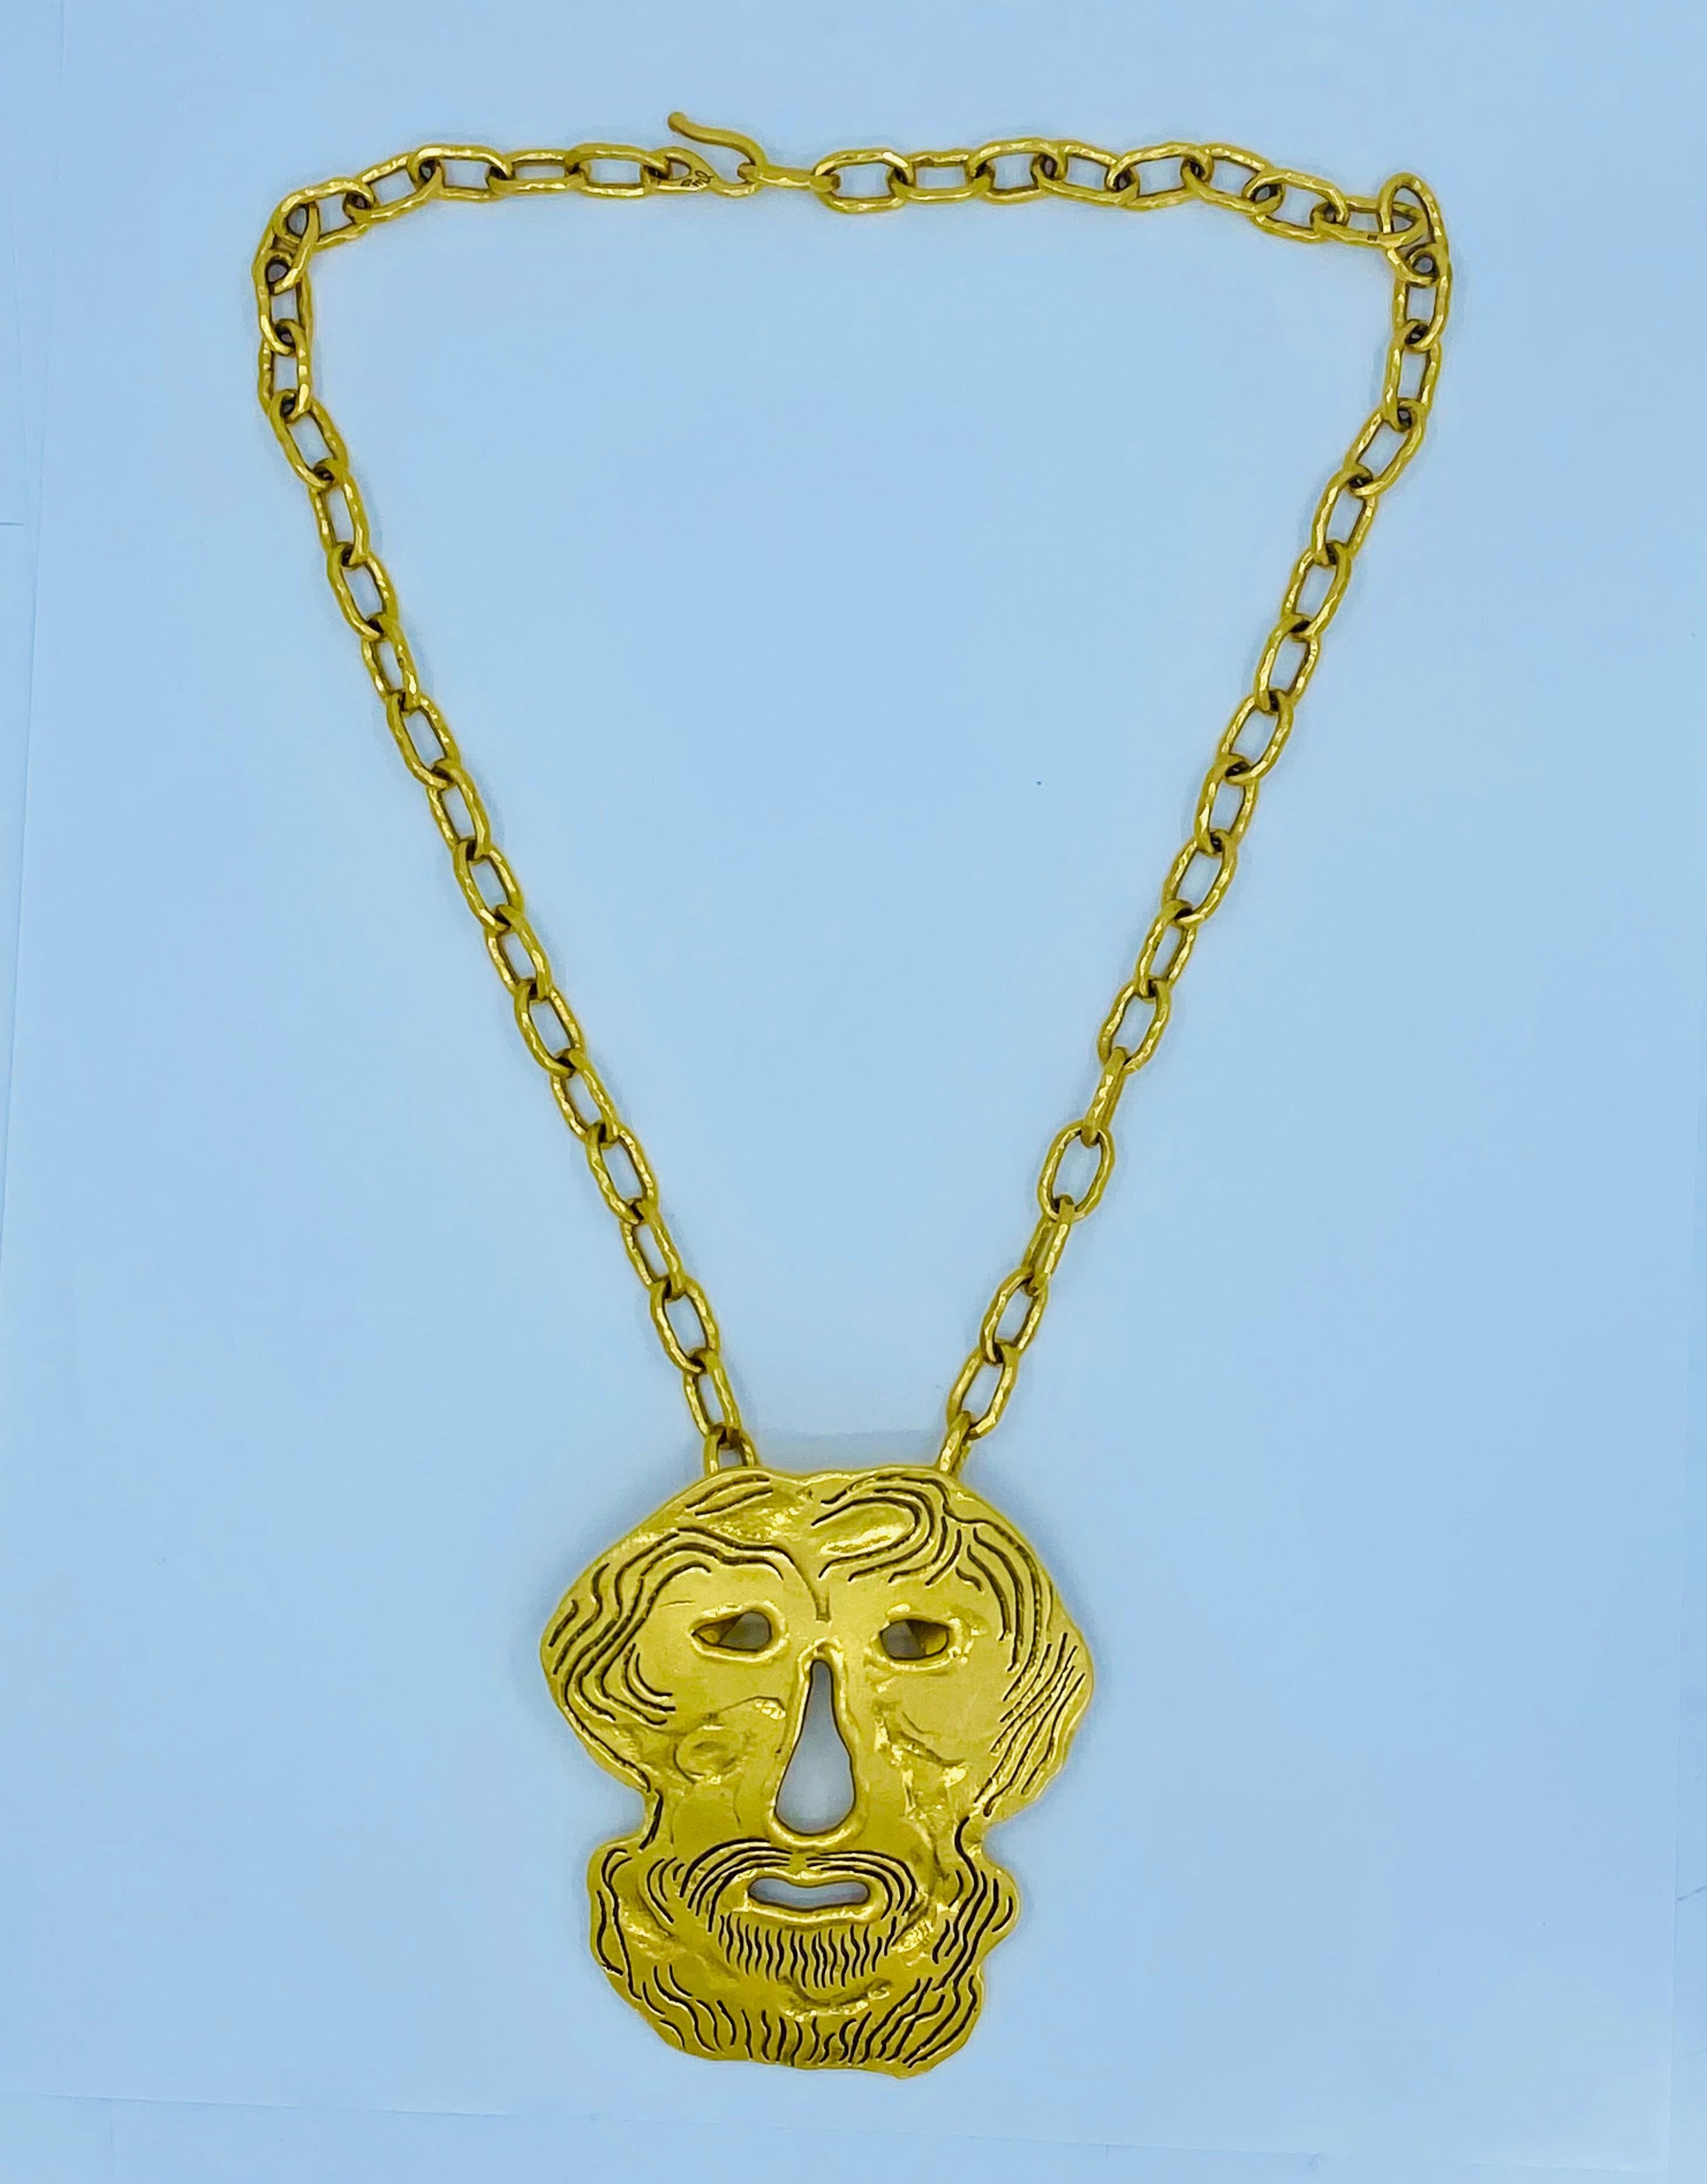 22k Gold Jean Mahie Figural Pendant Necklace In Excellent Condition For Sale In Beverly Hills, CA